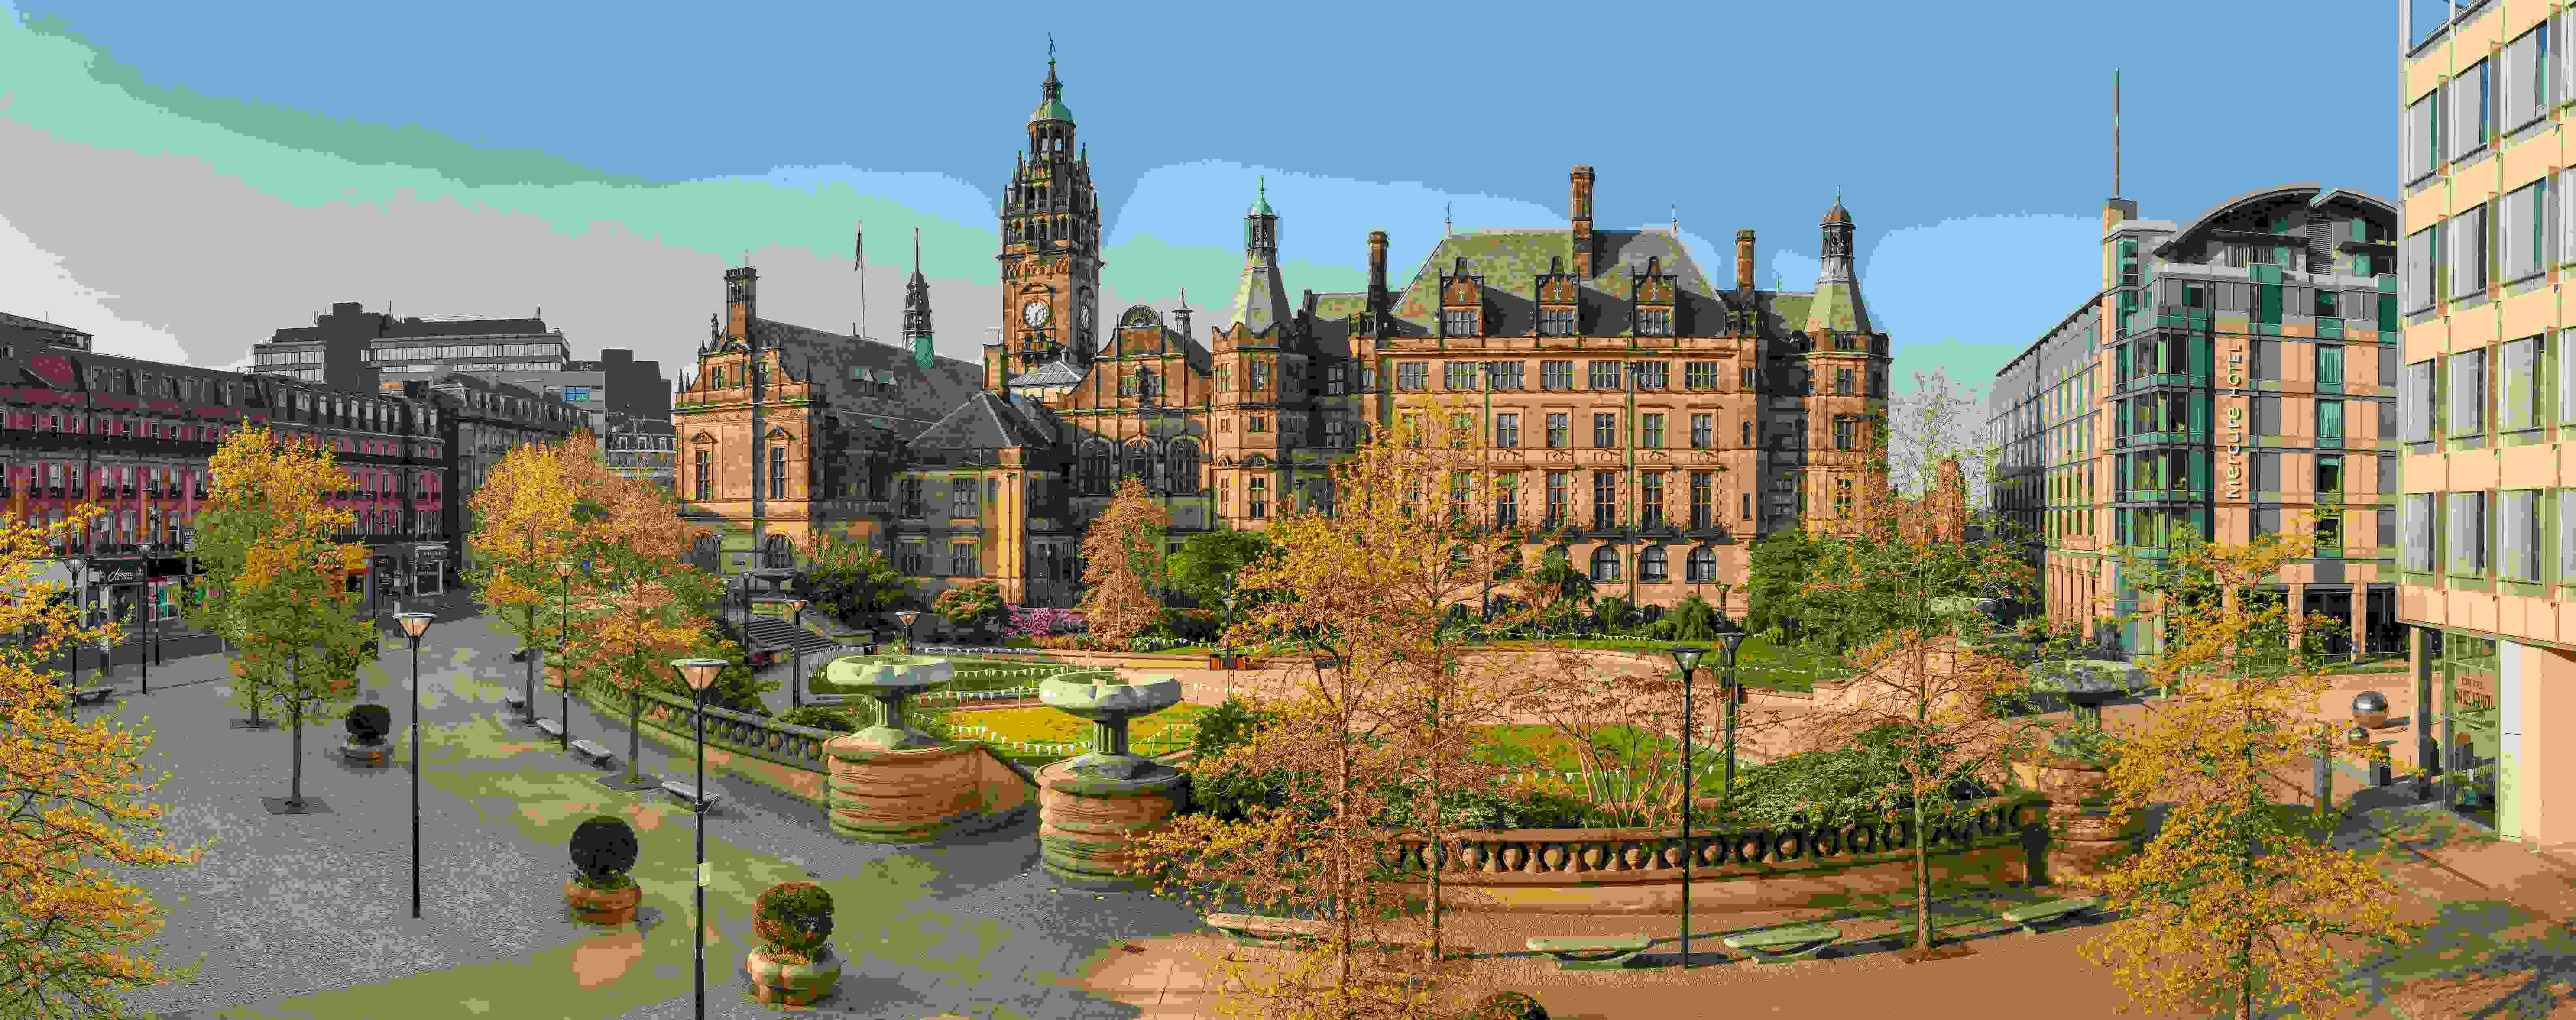 Peace Gardens with Sheffield Town Hall in the background